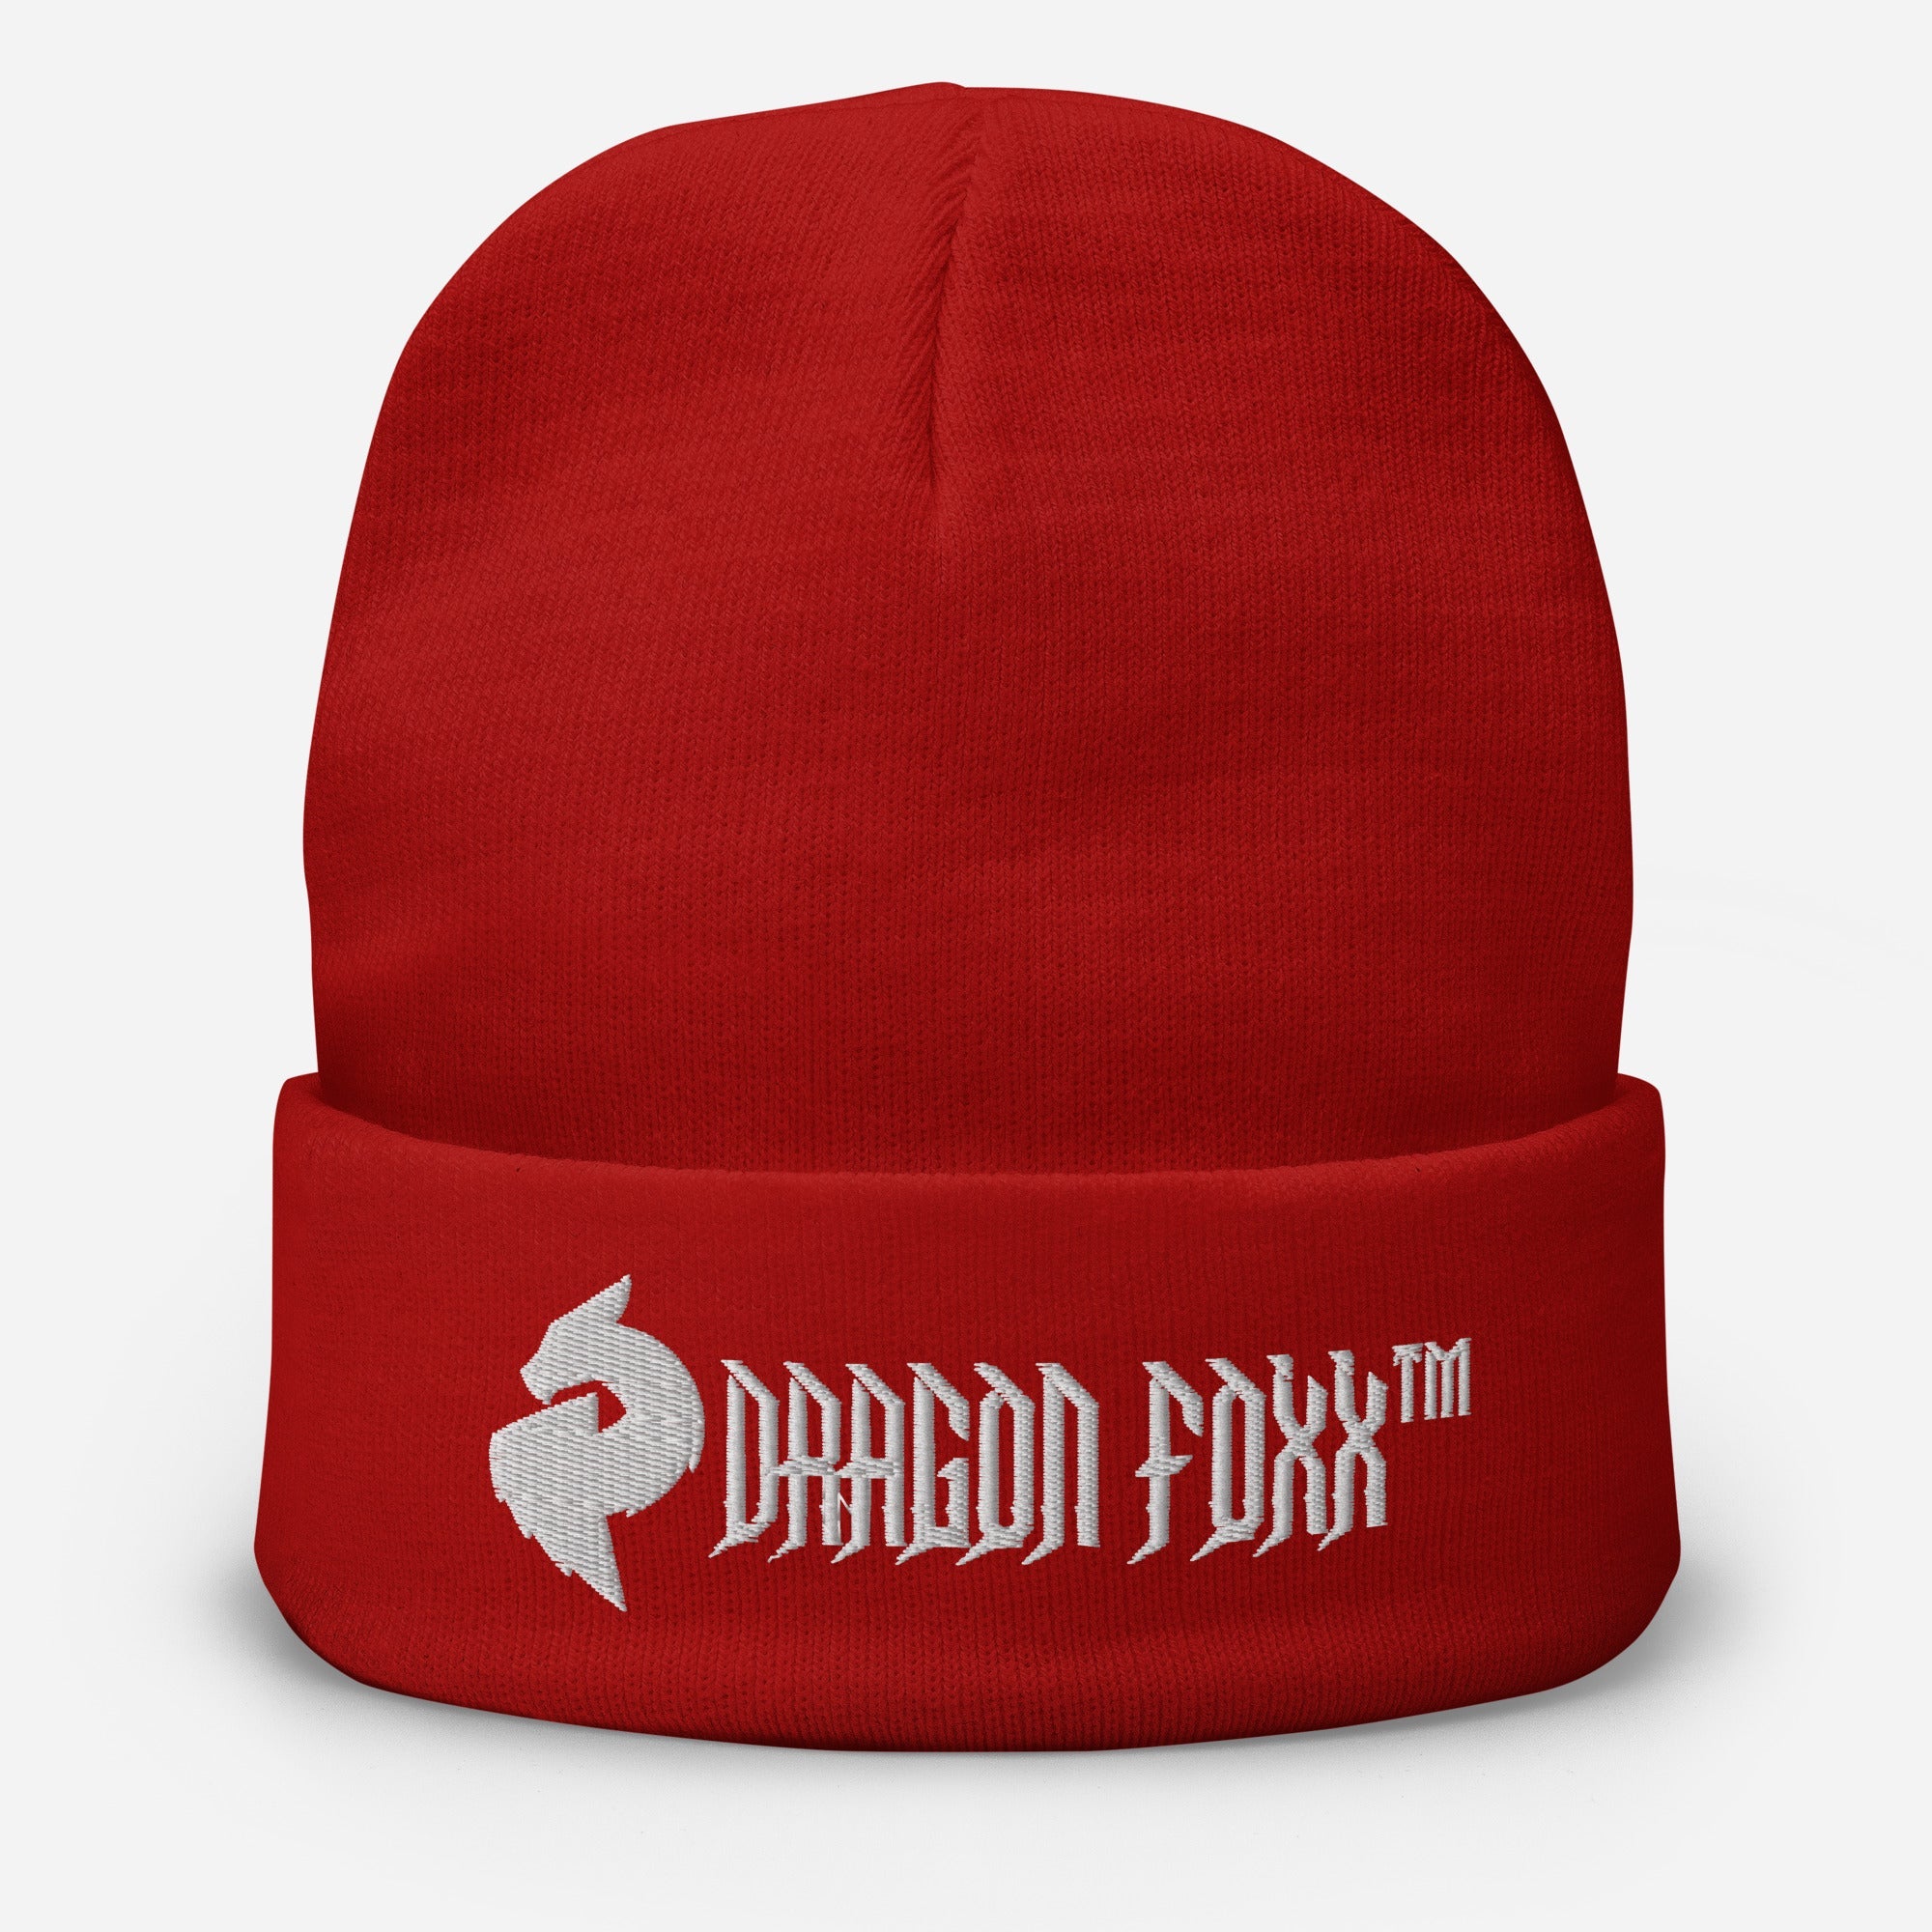 His or Hers Dragon Foxx™ Embroidered Beanie in 6 Colors - Dragon Foxx™ Embroidered Beanie - DRAGON FOXX™ - His or Hers Dragon Foxx™ Embroidered Beanie in 6 Colors - 9861092_4521 - Red - - Beanies - Black Beanie - Dark Green Beanie